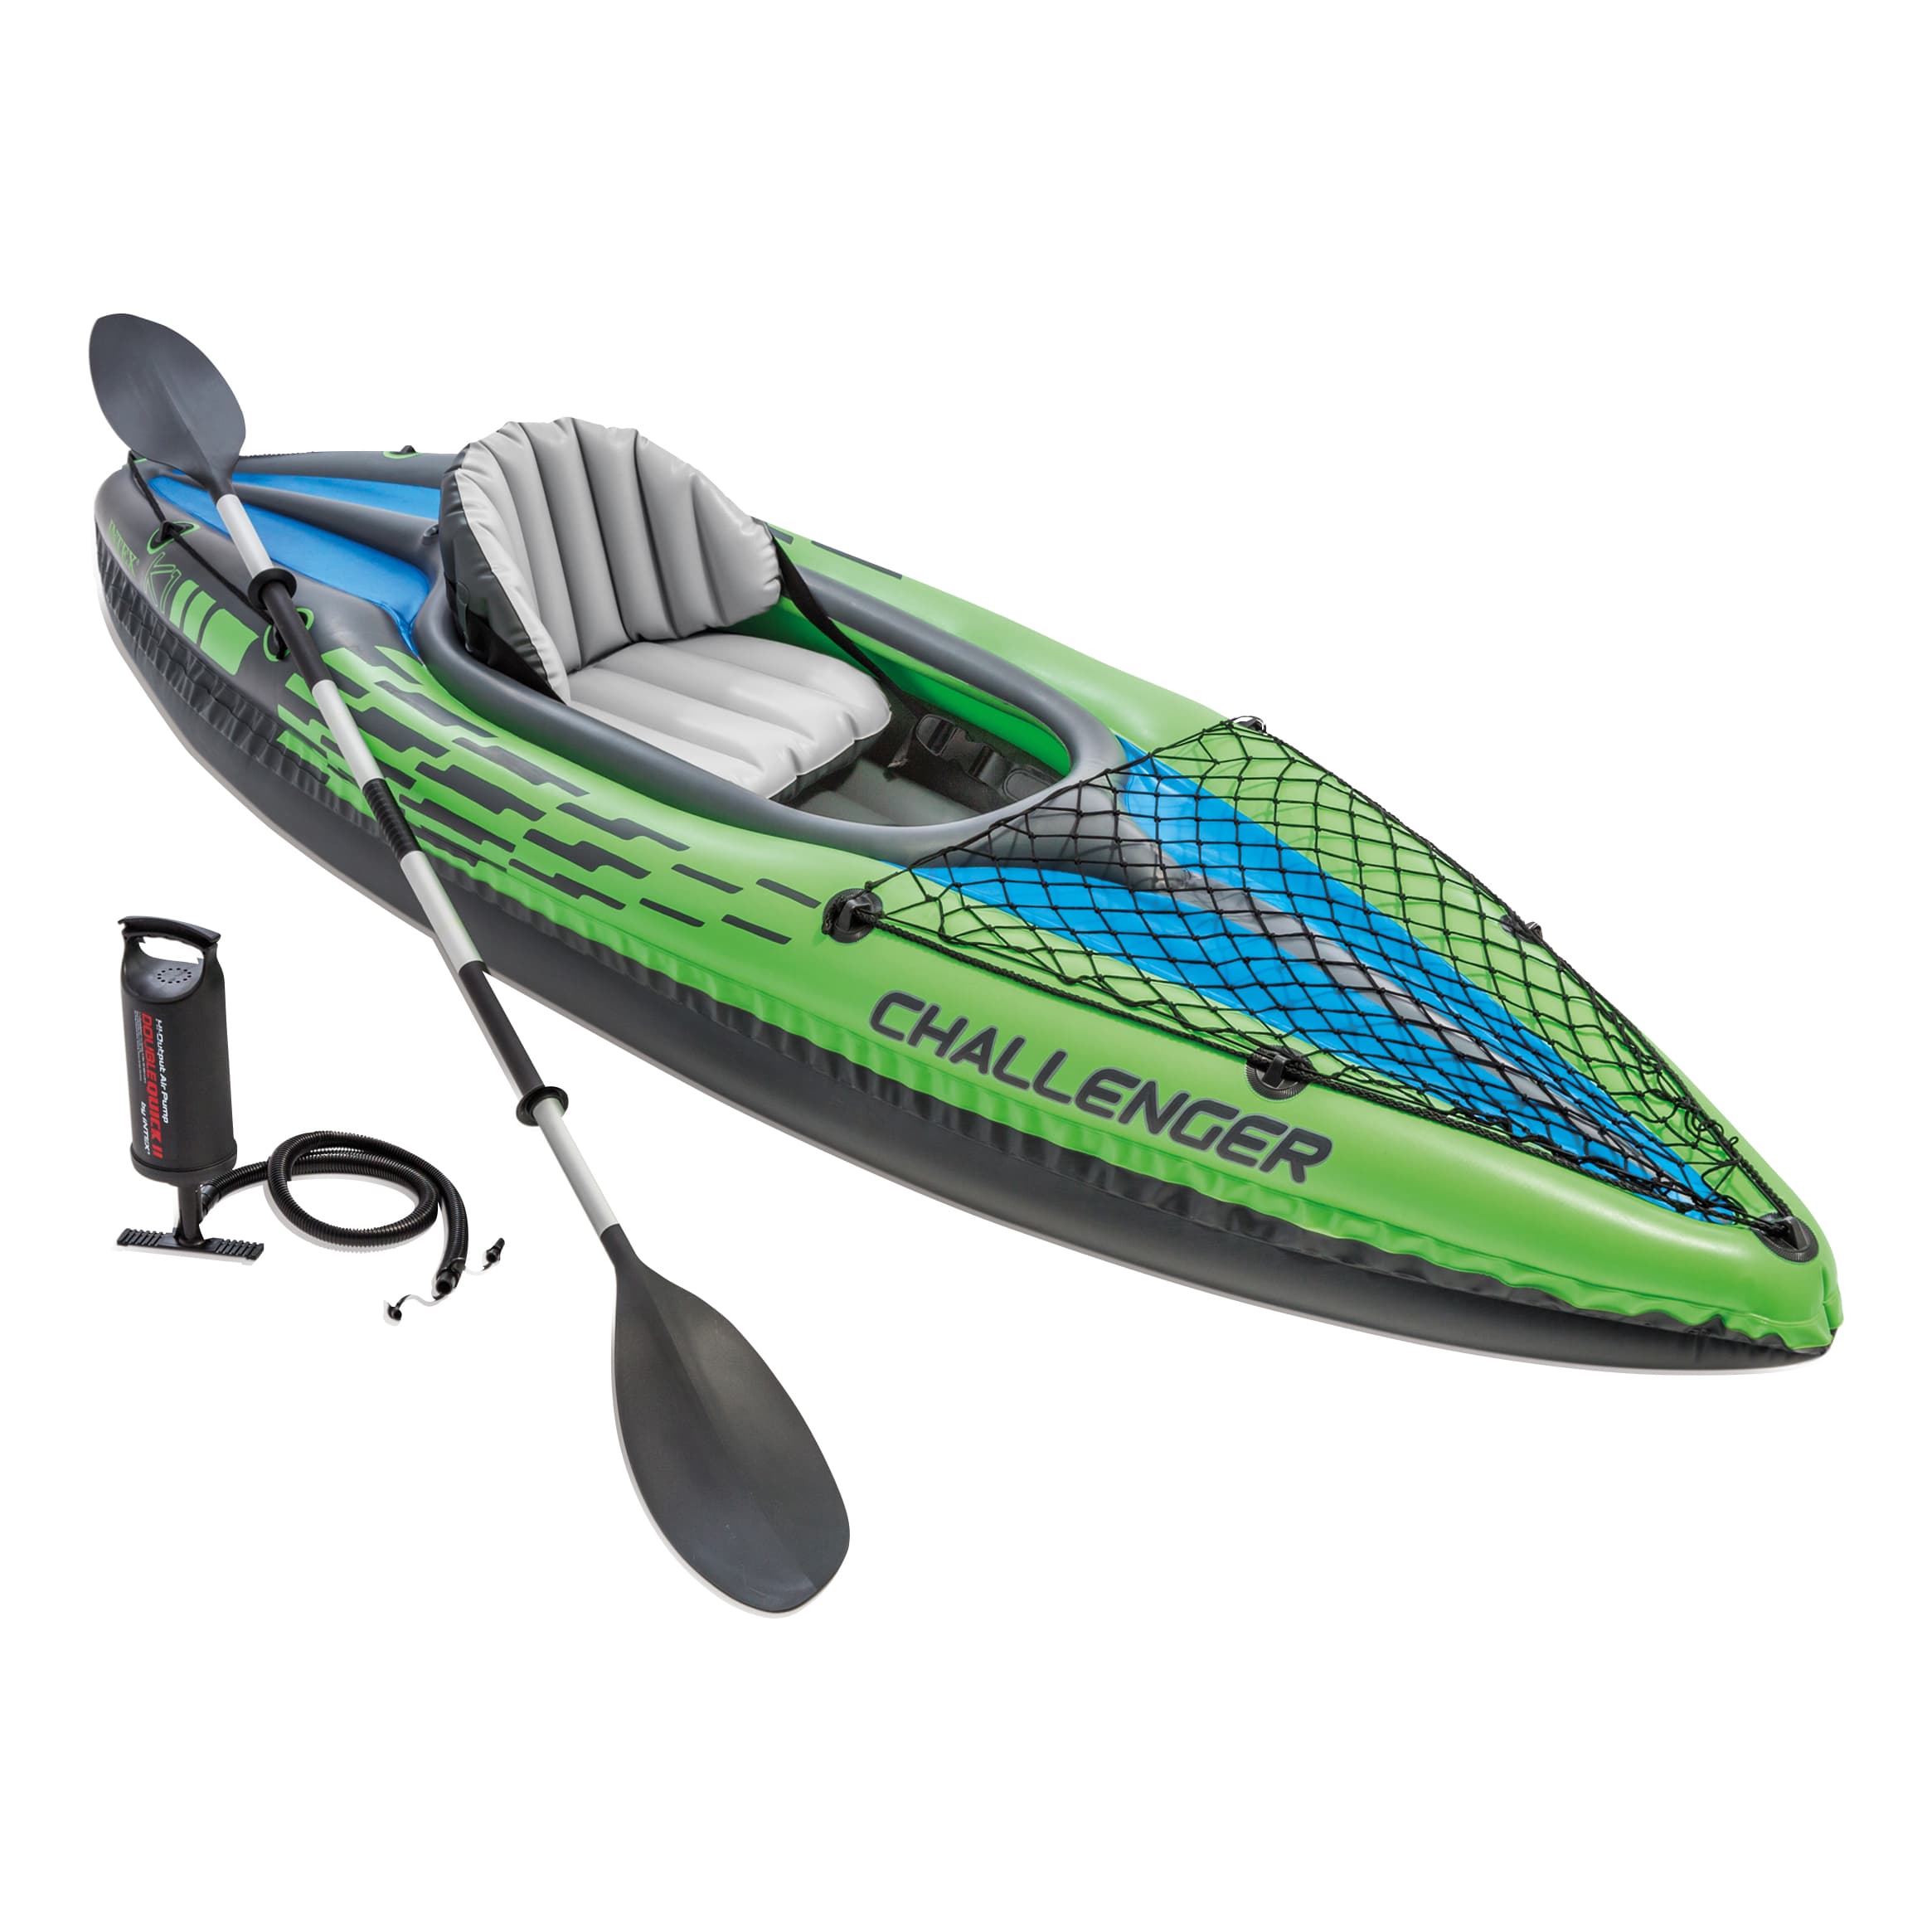 Intex Excursion 4 Inflatable Rafting/Fishing Boat Set WITH 2 Oars  68324EP-WMT - The Home Depot